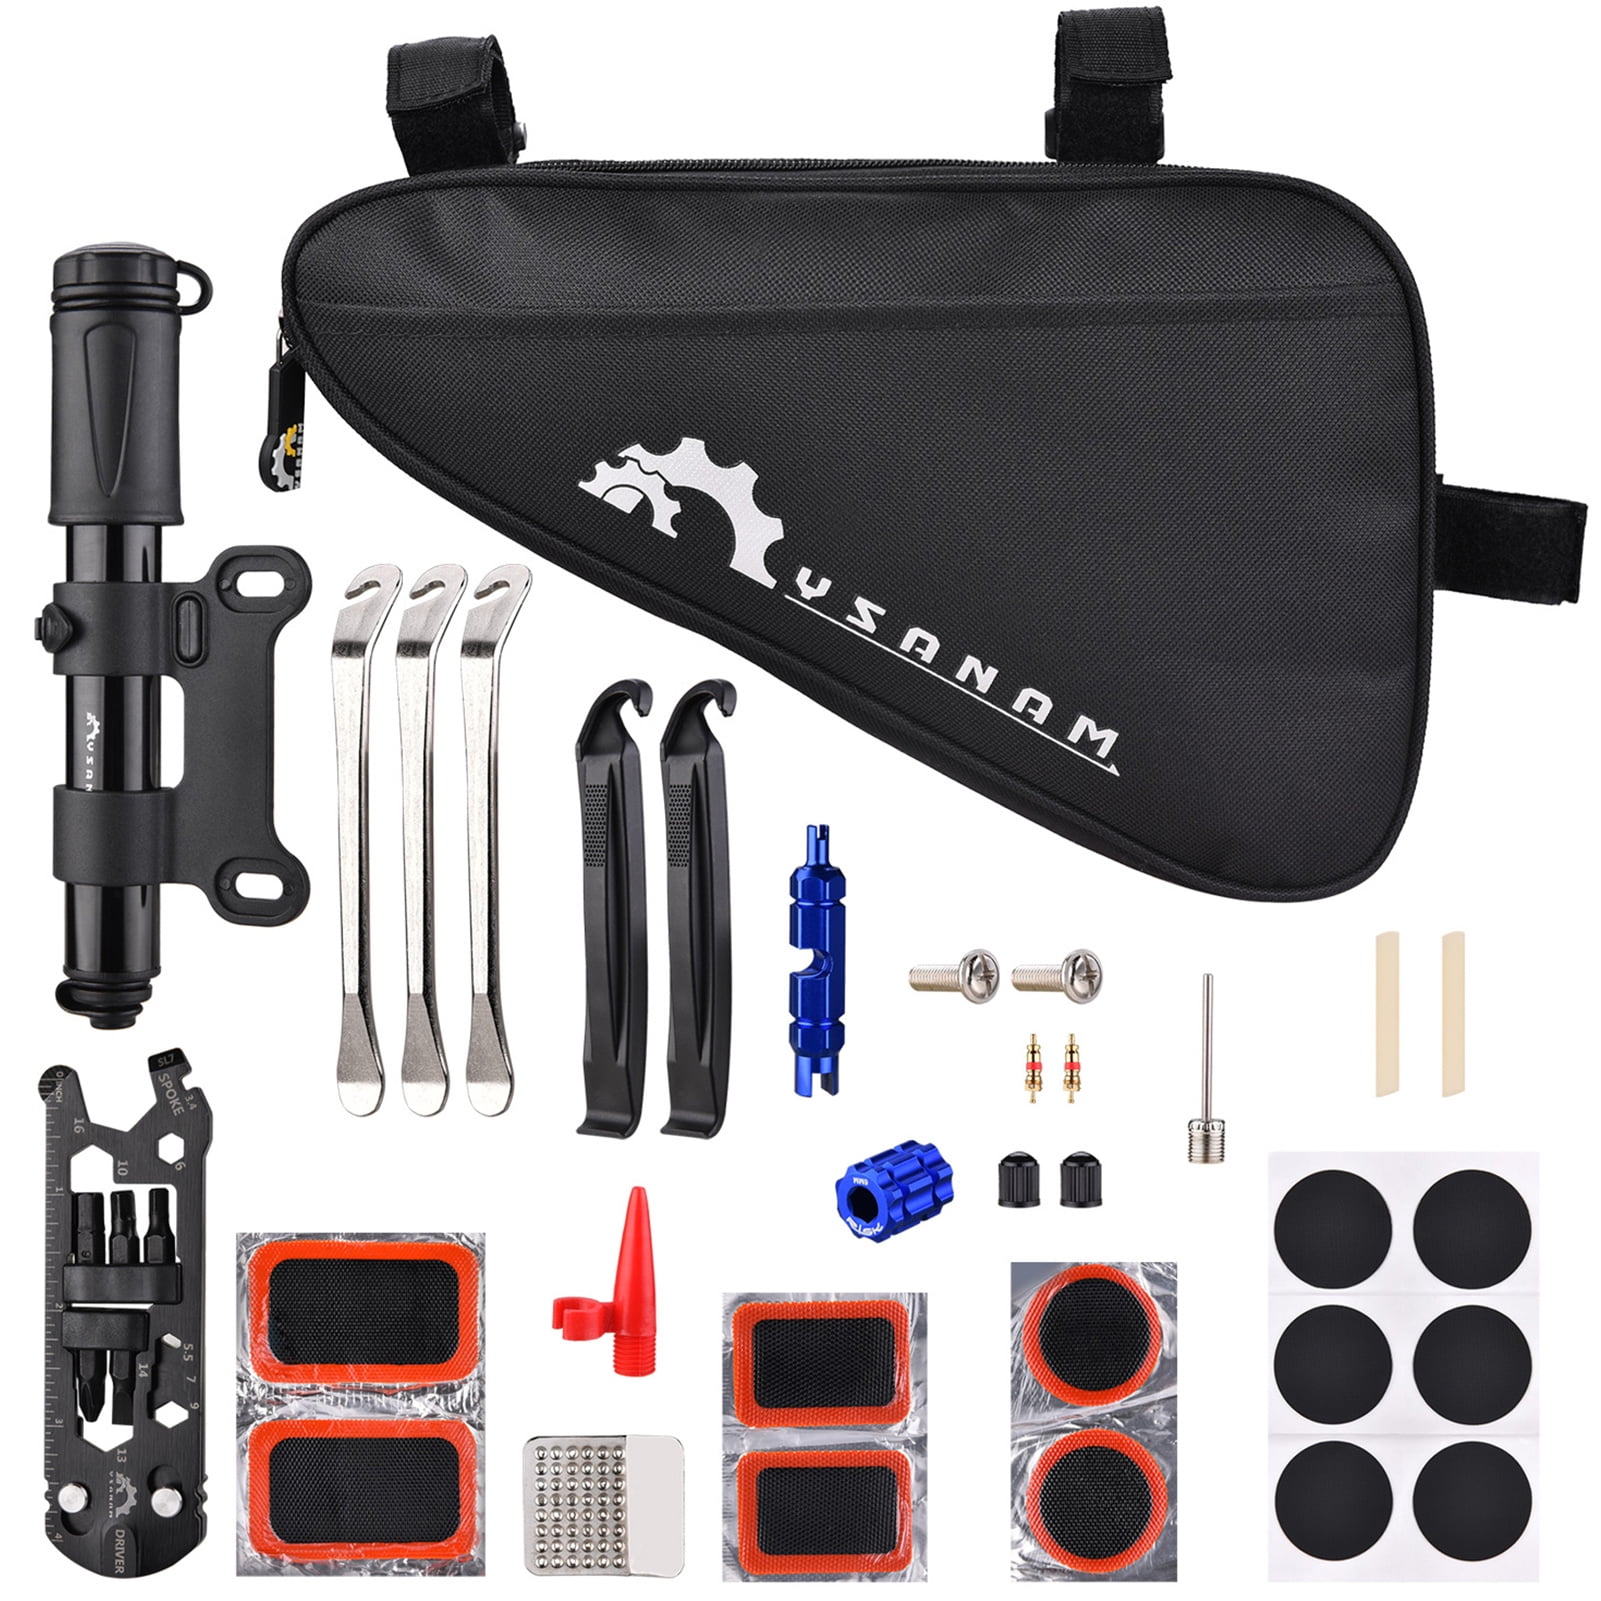 Details about   Bicycle Repair Bag & Bicycle Tire Pump Home Bike Tool Portable Patches Fixes,